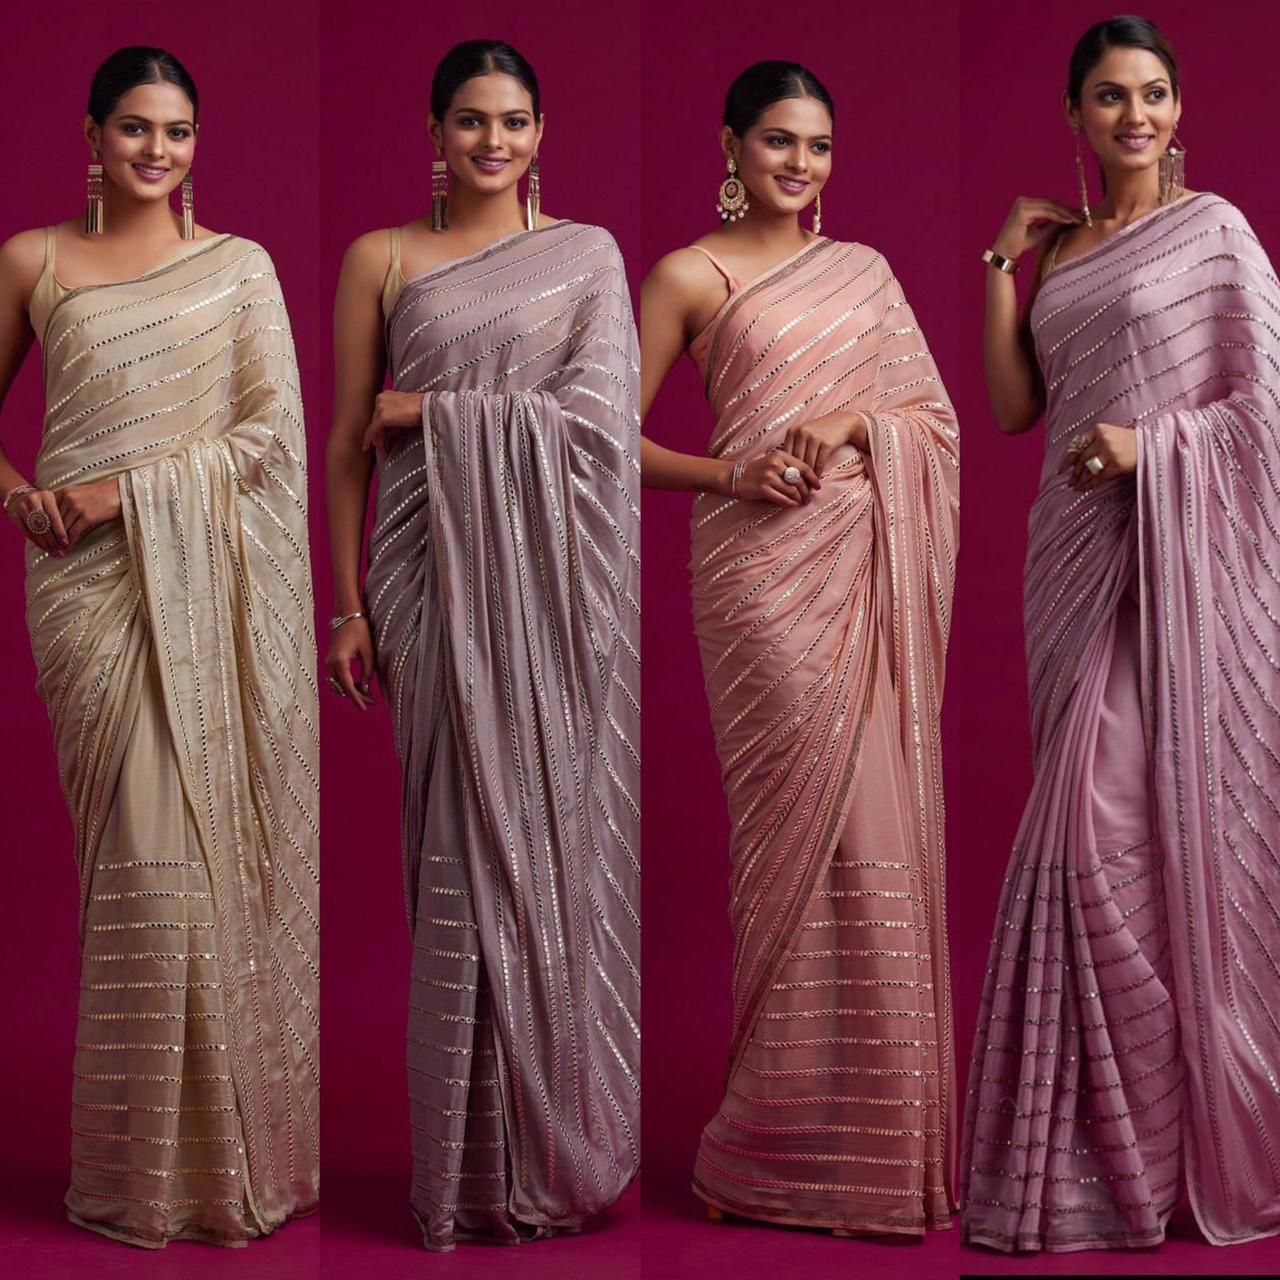 New launching Superhit bollywood Saree Collection